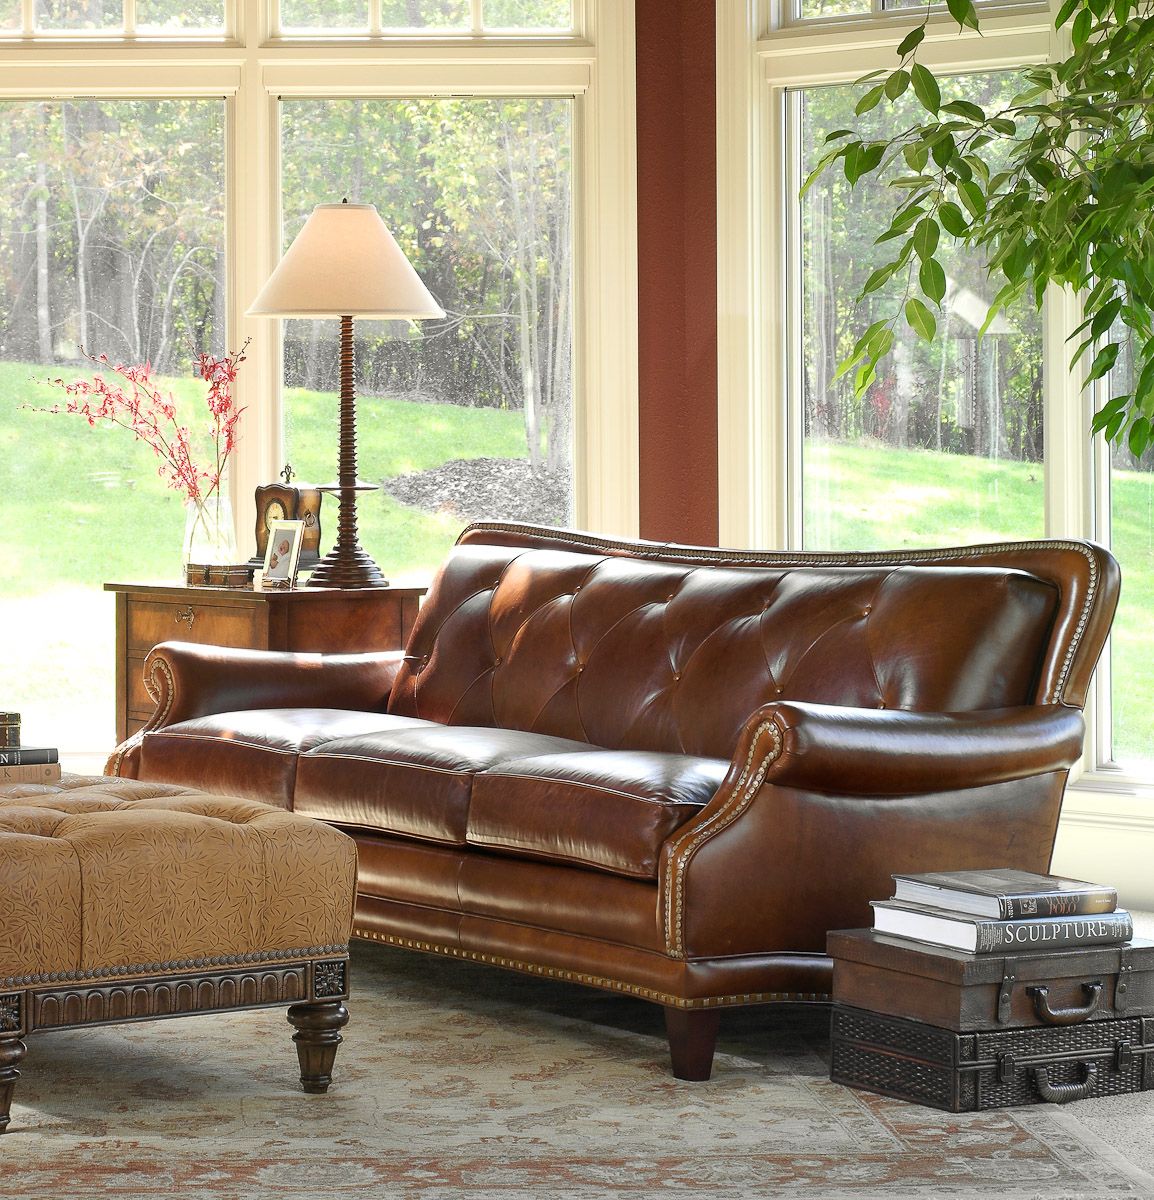 Living Room Leather Furniture Within Sofa Chairs For Living Room (View 3 of 15)